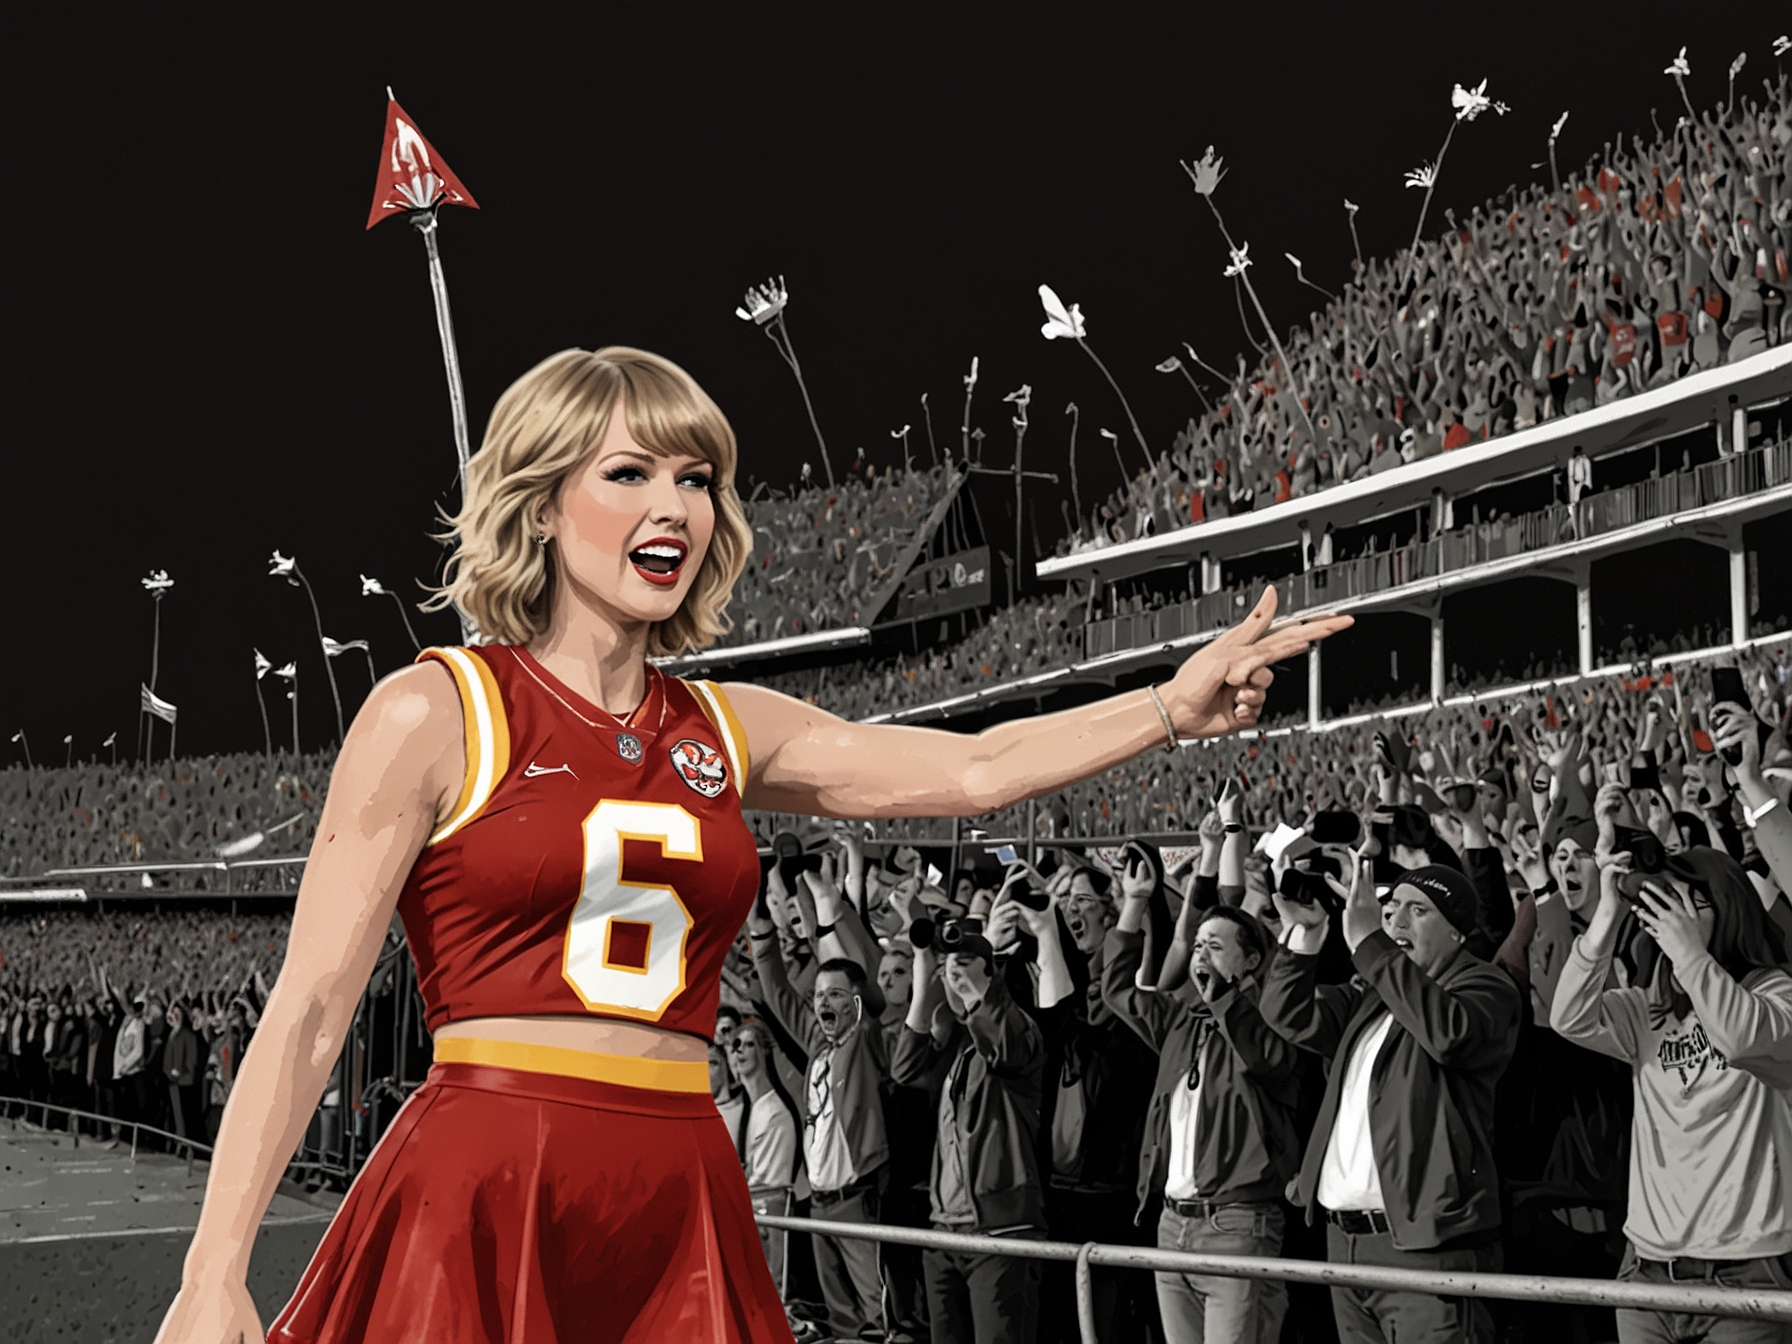 A jubilant crowd of fans and media captures the moment Taylor Swift's arrow hits the Chiefs-themed target, symbolizing her deepening relationship with Travis Kelce amid cheers and applause.